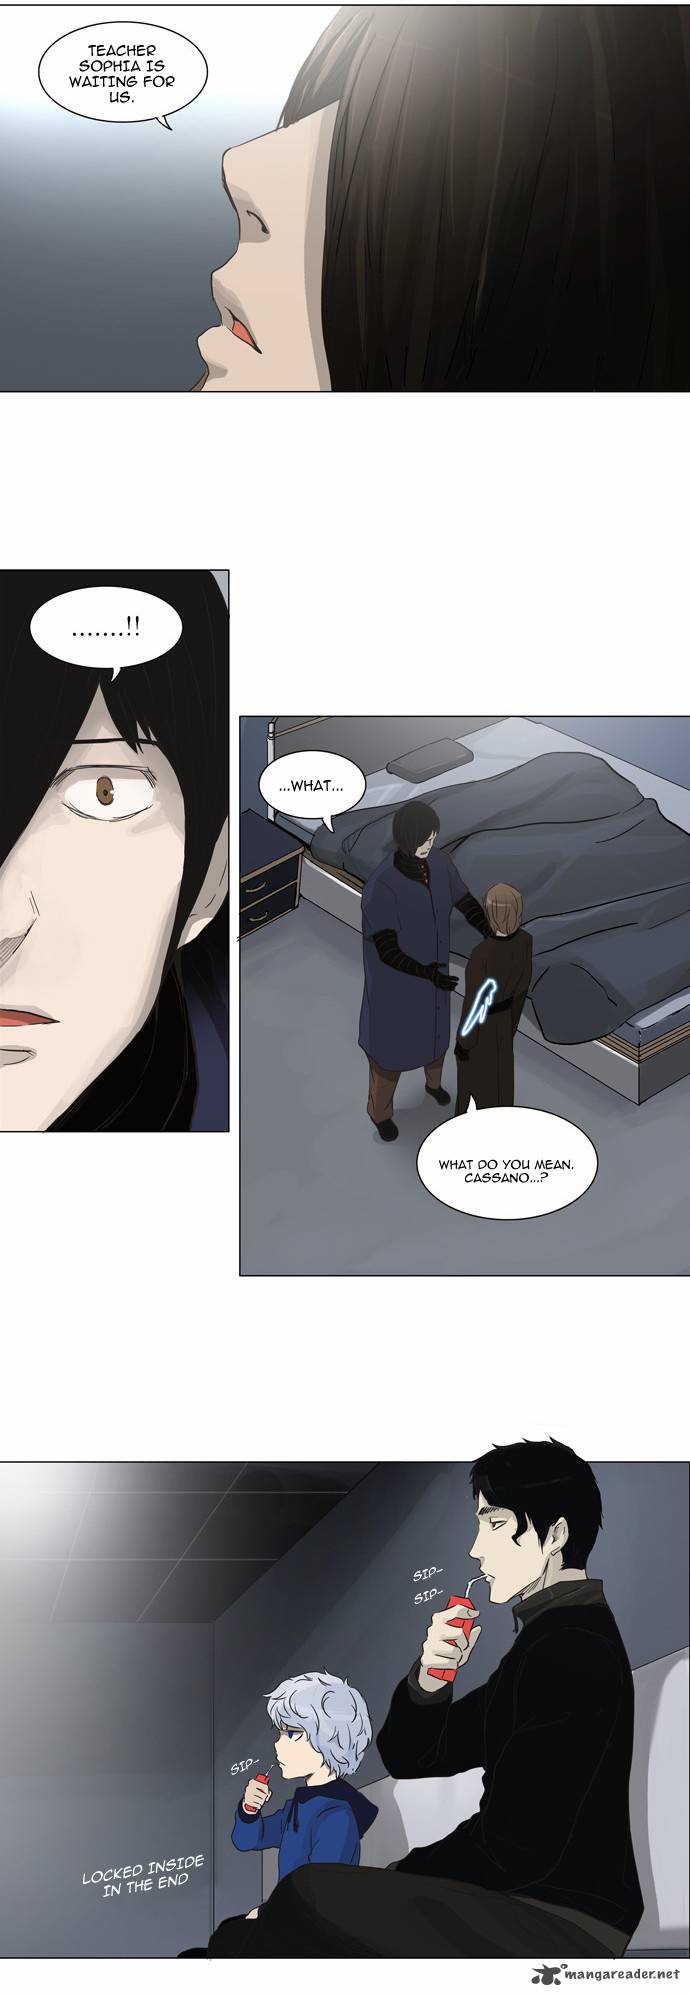 Tower Of God 134 3